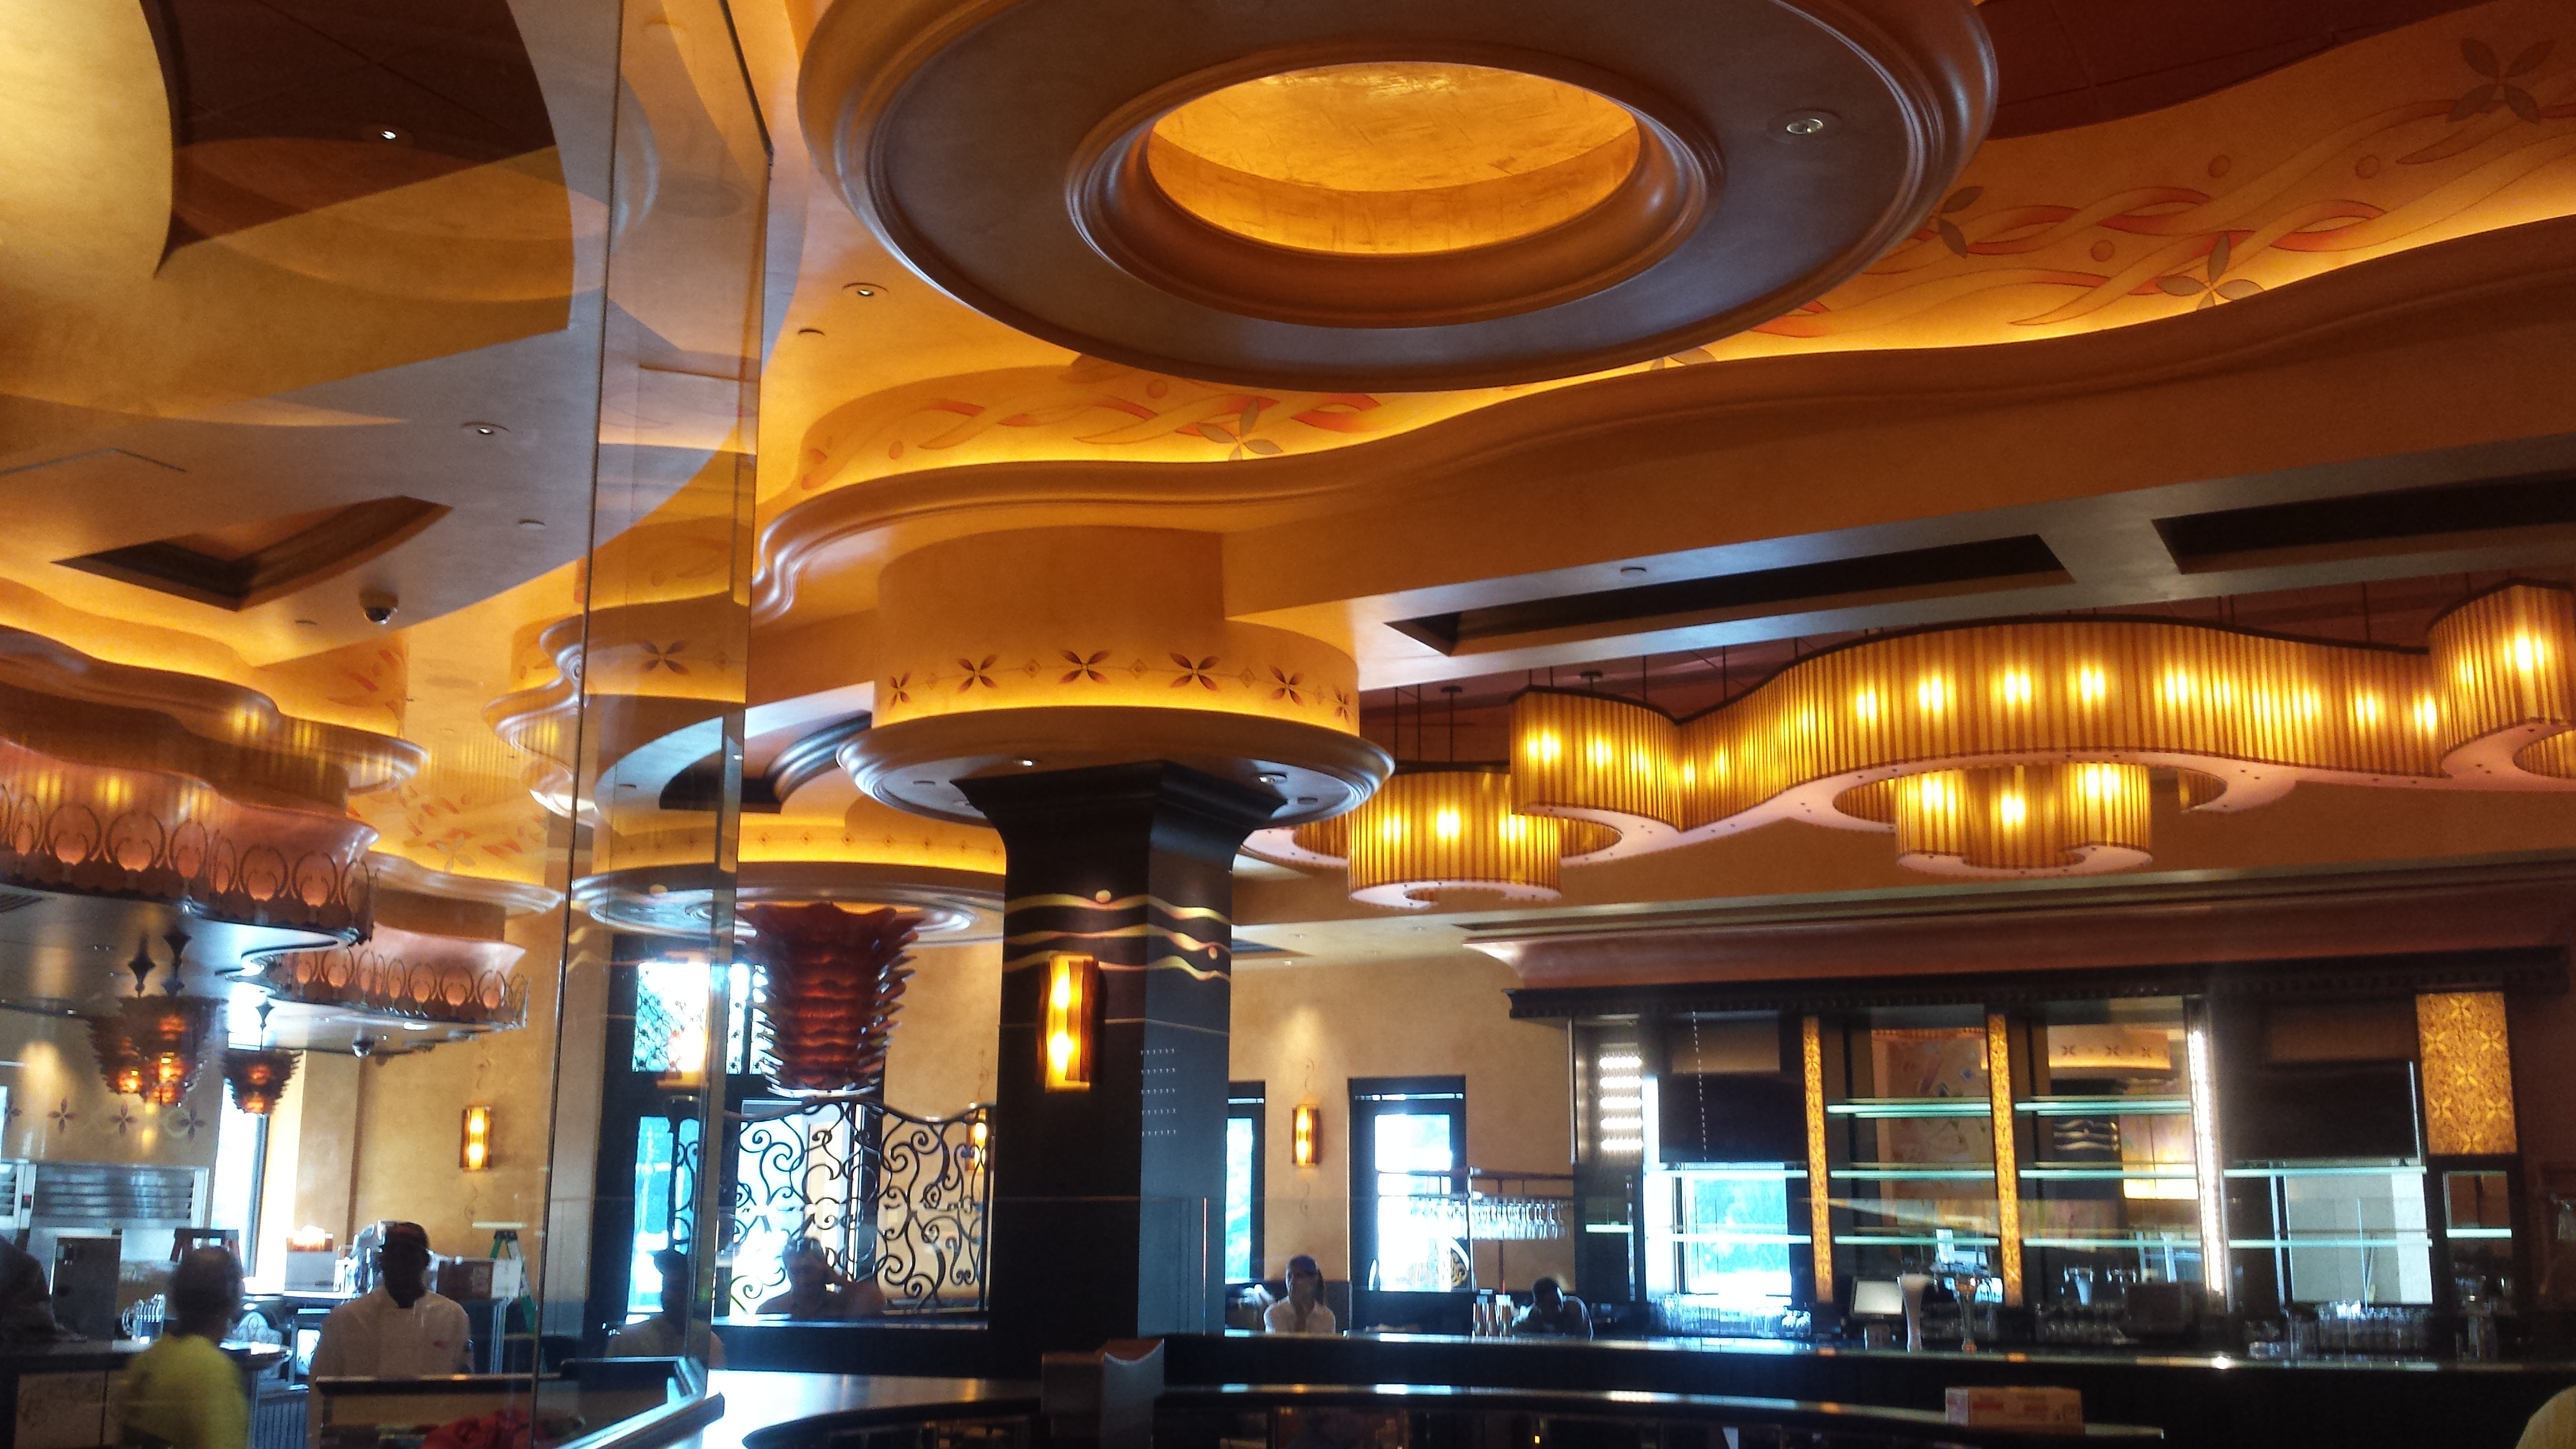 Cheesecake Factory Stamford Conn Acoustics Inc